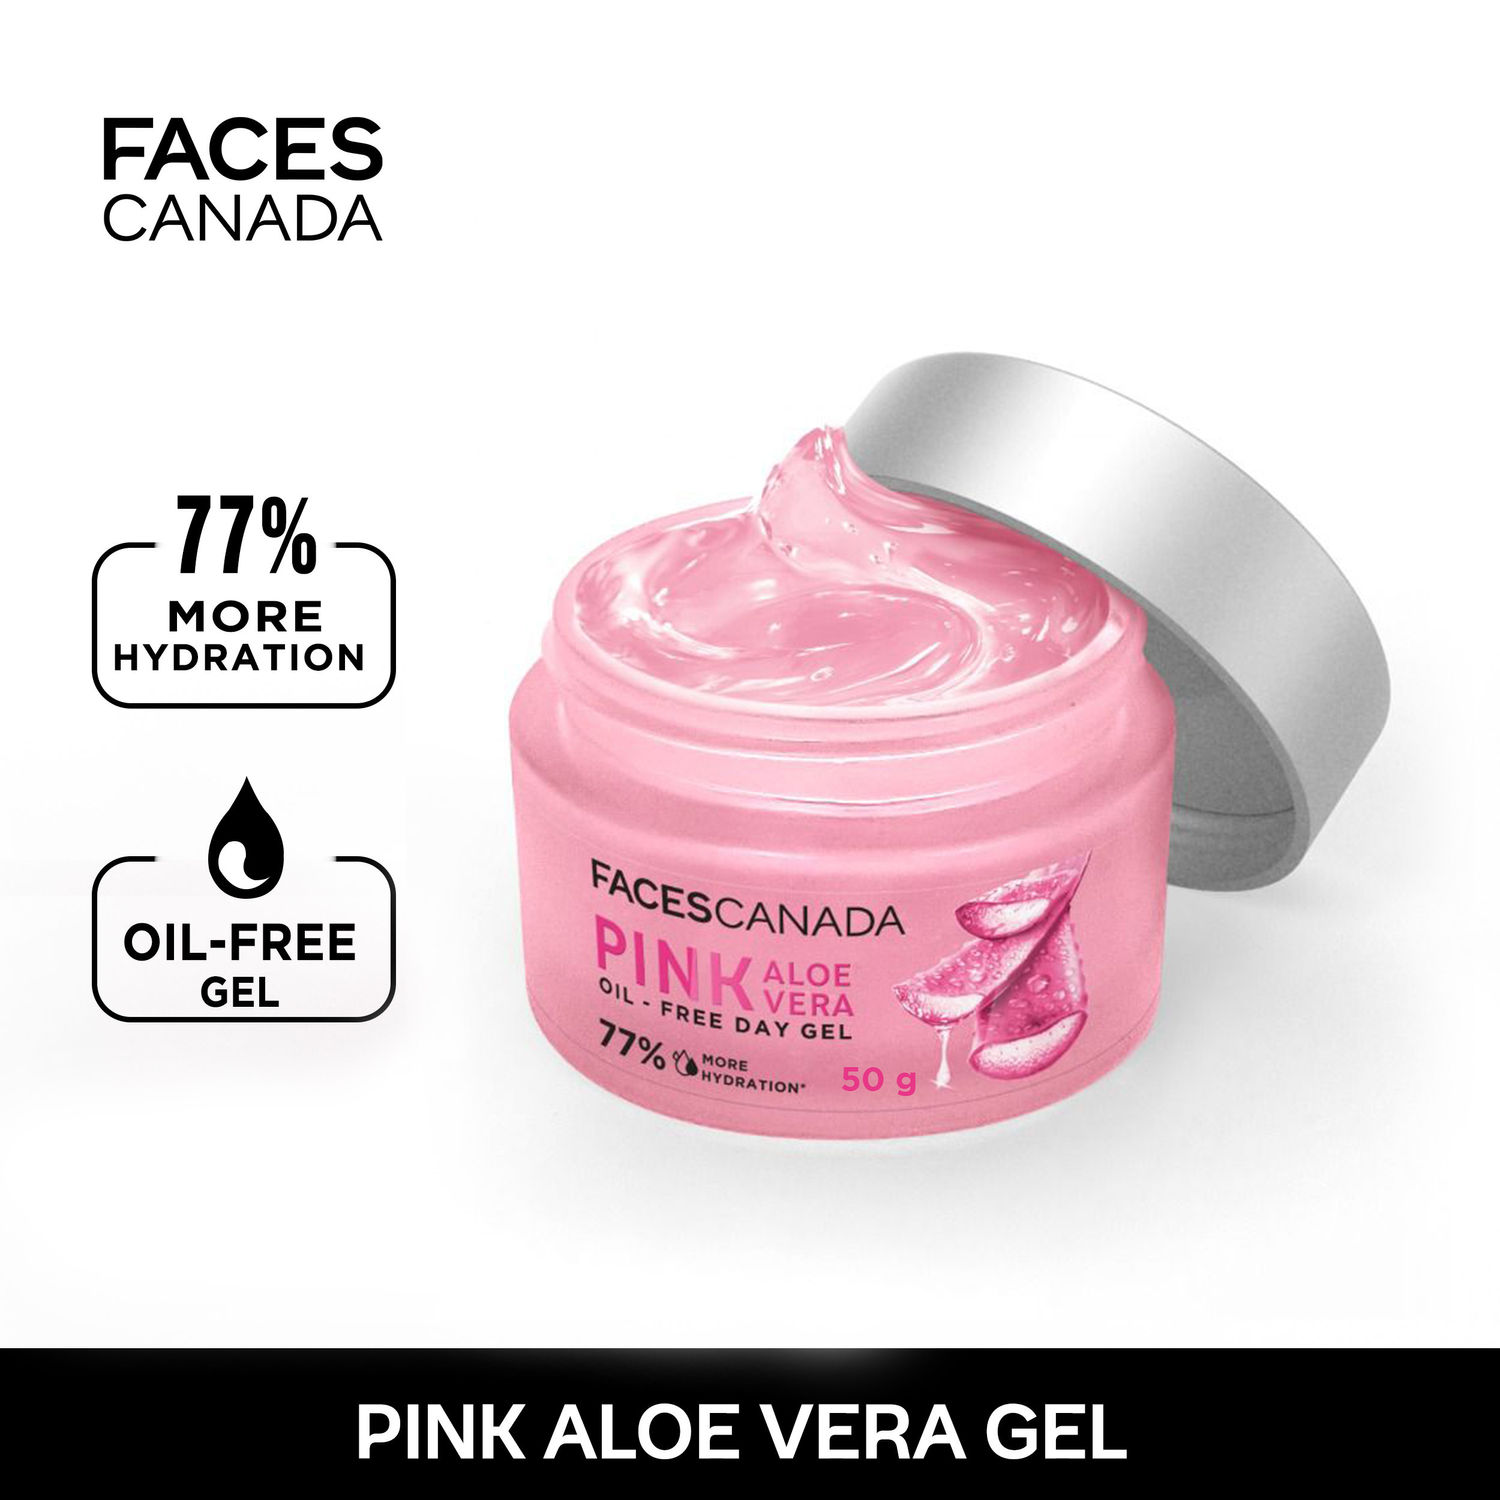 Buy FACES CANADA Pink Aloe Vera Oil-Free Day Gel, 50g | 1.5% Hyaluronic Acid | Intense Hydration | Lightweight, Non Sticky & Absorbs Easily | Soothing, Nourishing & Acne Control | No Alcohol & Parabens - Purplle